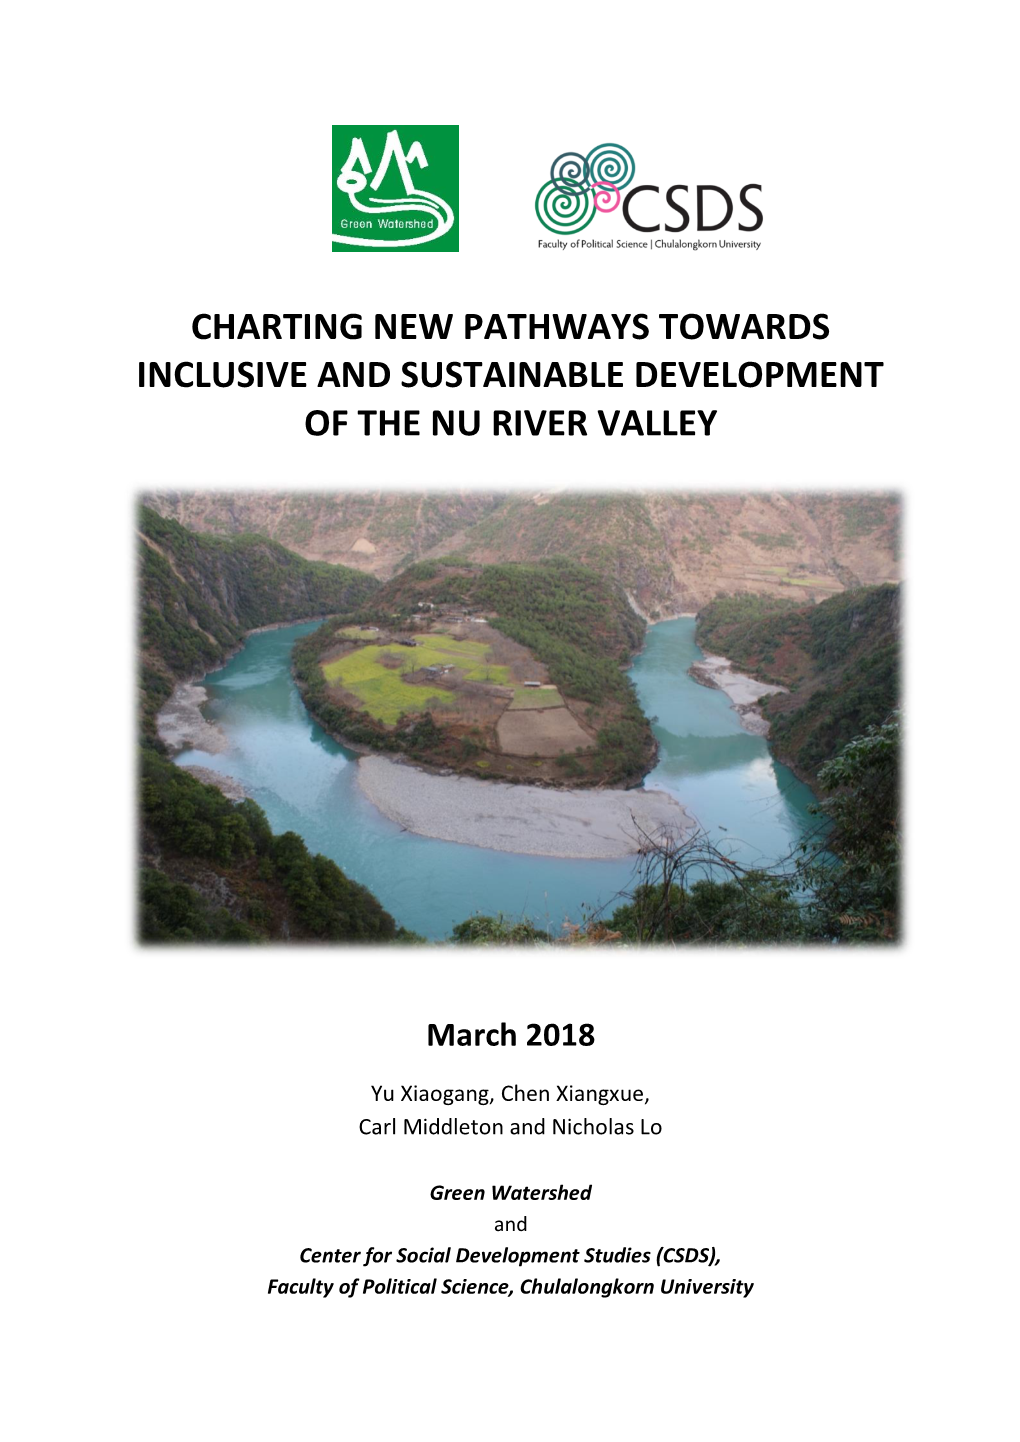 Charting New Pathways Towards Inclusive and Sustainable Development of the Nu River Valley